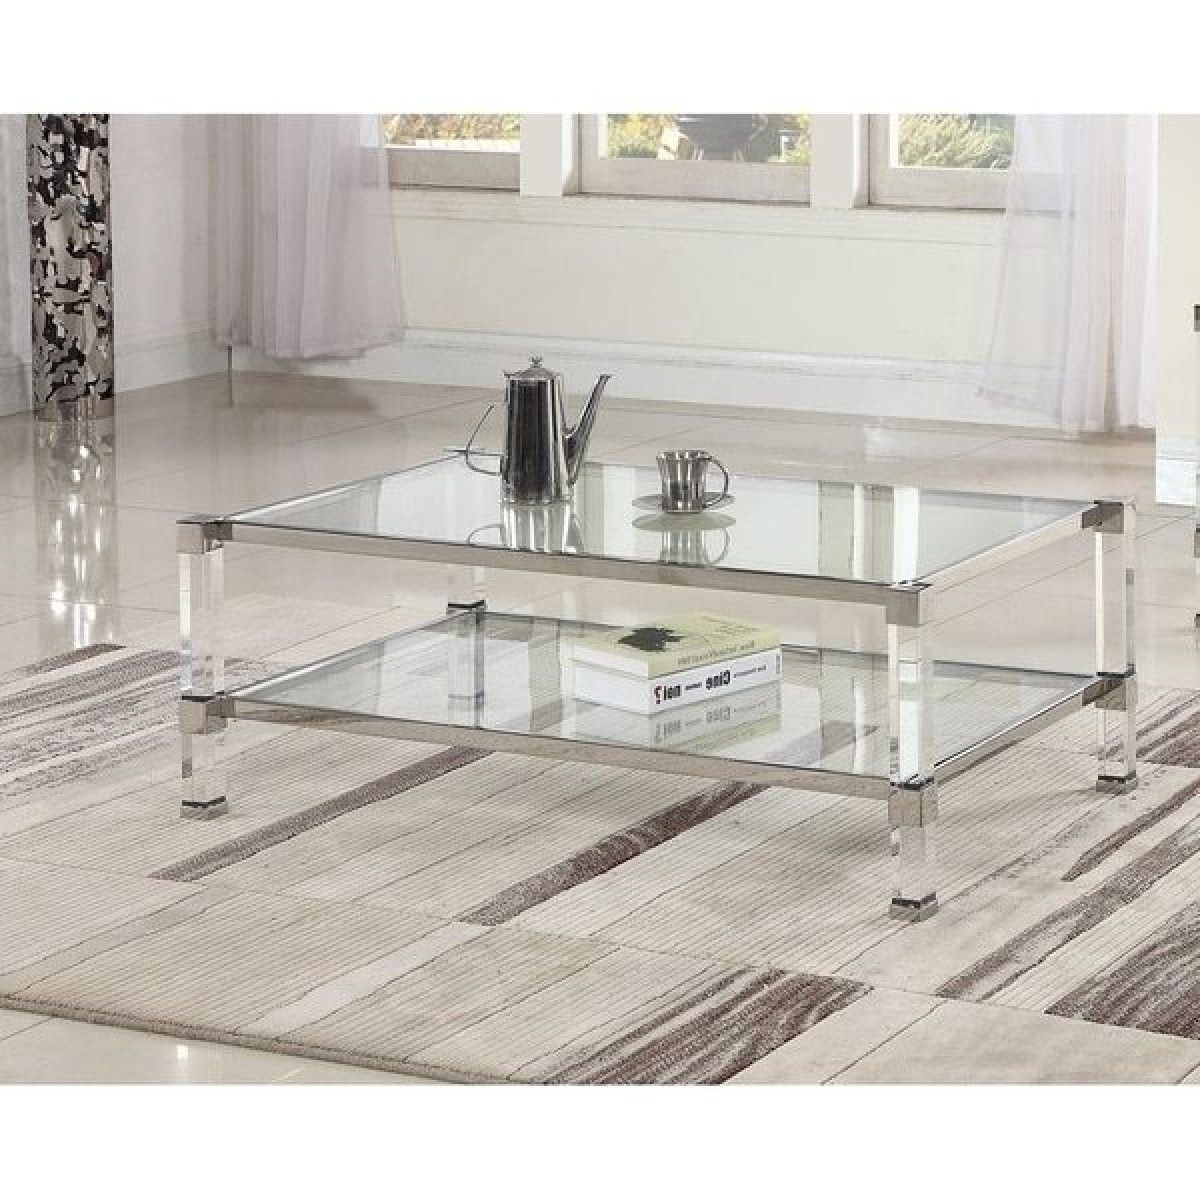 Contemporary & Luxury Furniture; Living Room, Bedroom,la Within Most Recent Acrylic Coffee Tables (View 16 of 20)